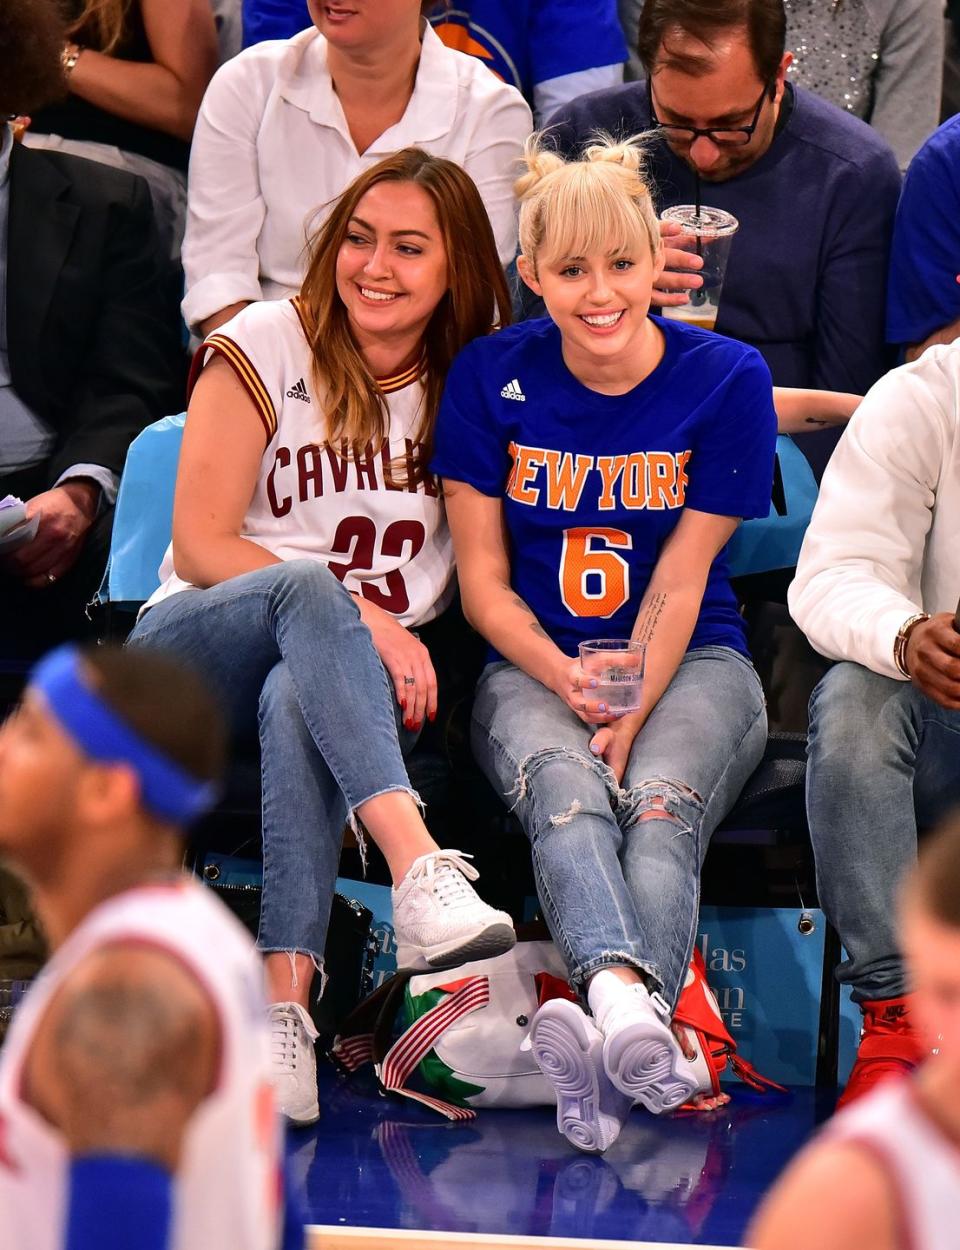 <p>Brandi and Miley Cyrus both grew up as celebrity off-spring—their dad is country singer, Billy Ray Cyrus—and they both followed him into the music industry. Not to mention, they have the same round faces and wide smiles.</p>